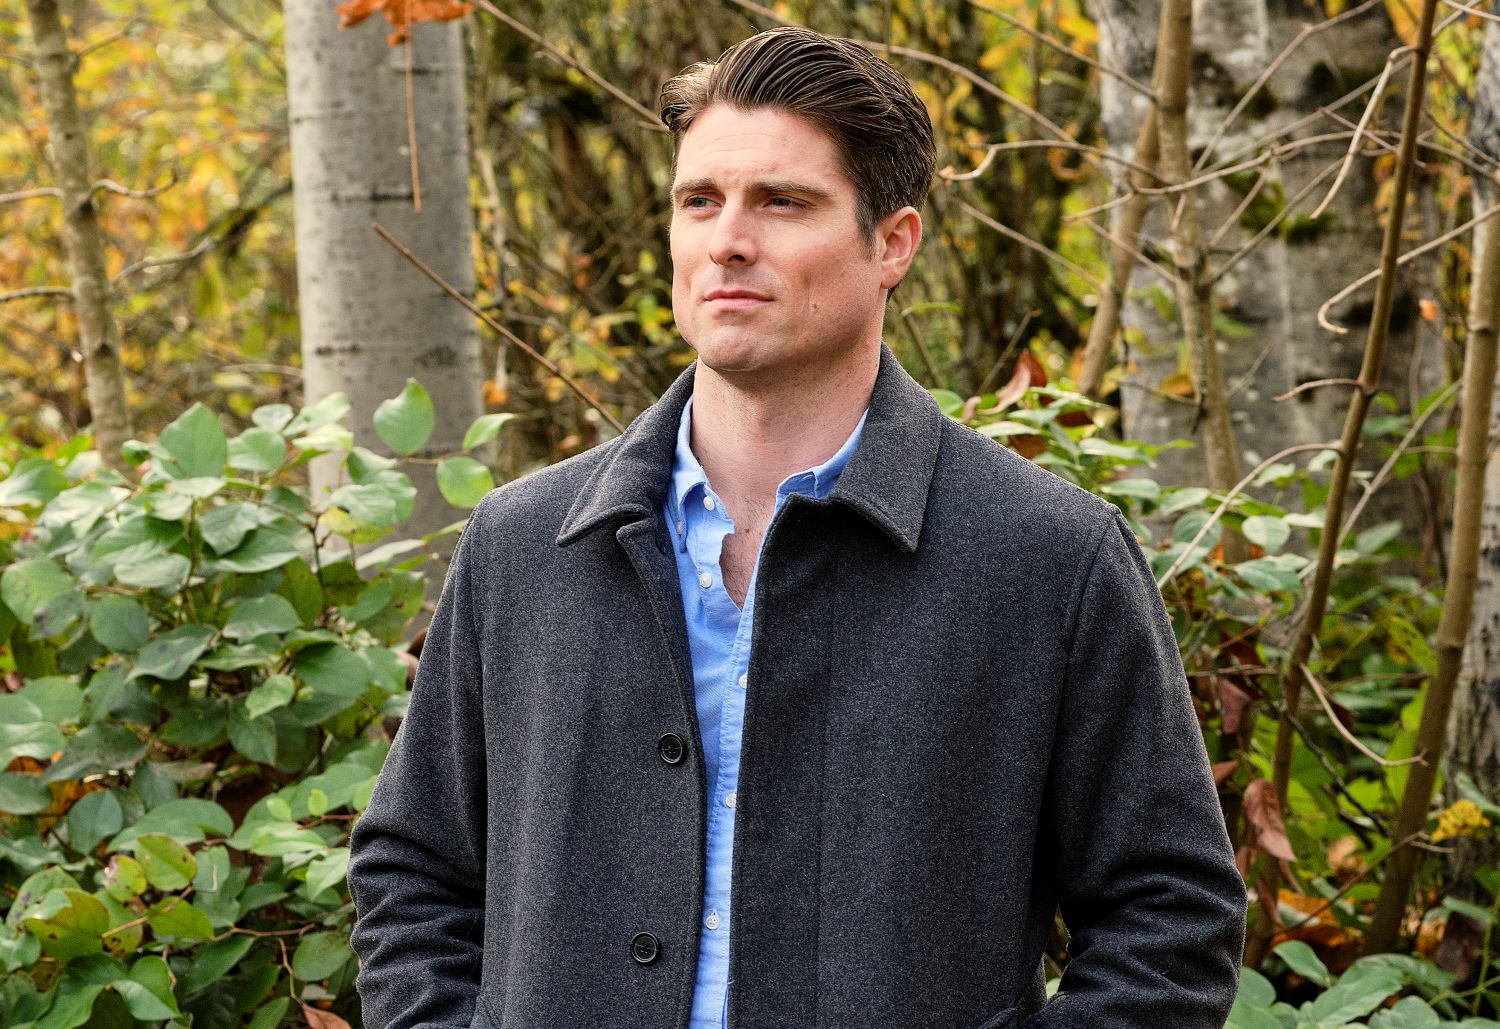 Marcus Rosner stars in Notes of Autumn on Hallmark Channel